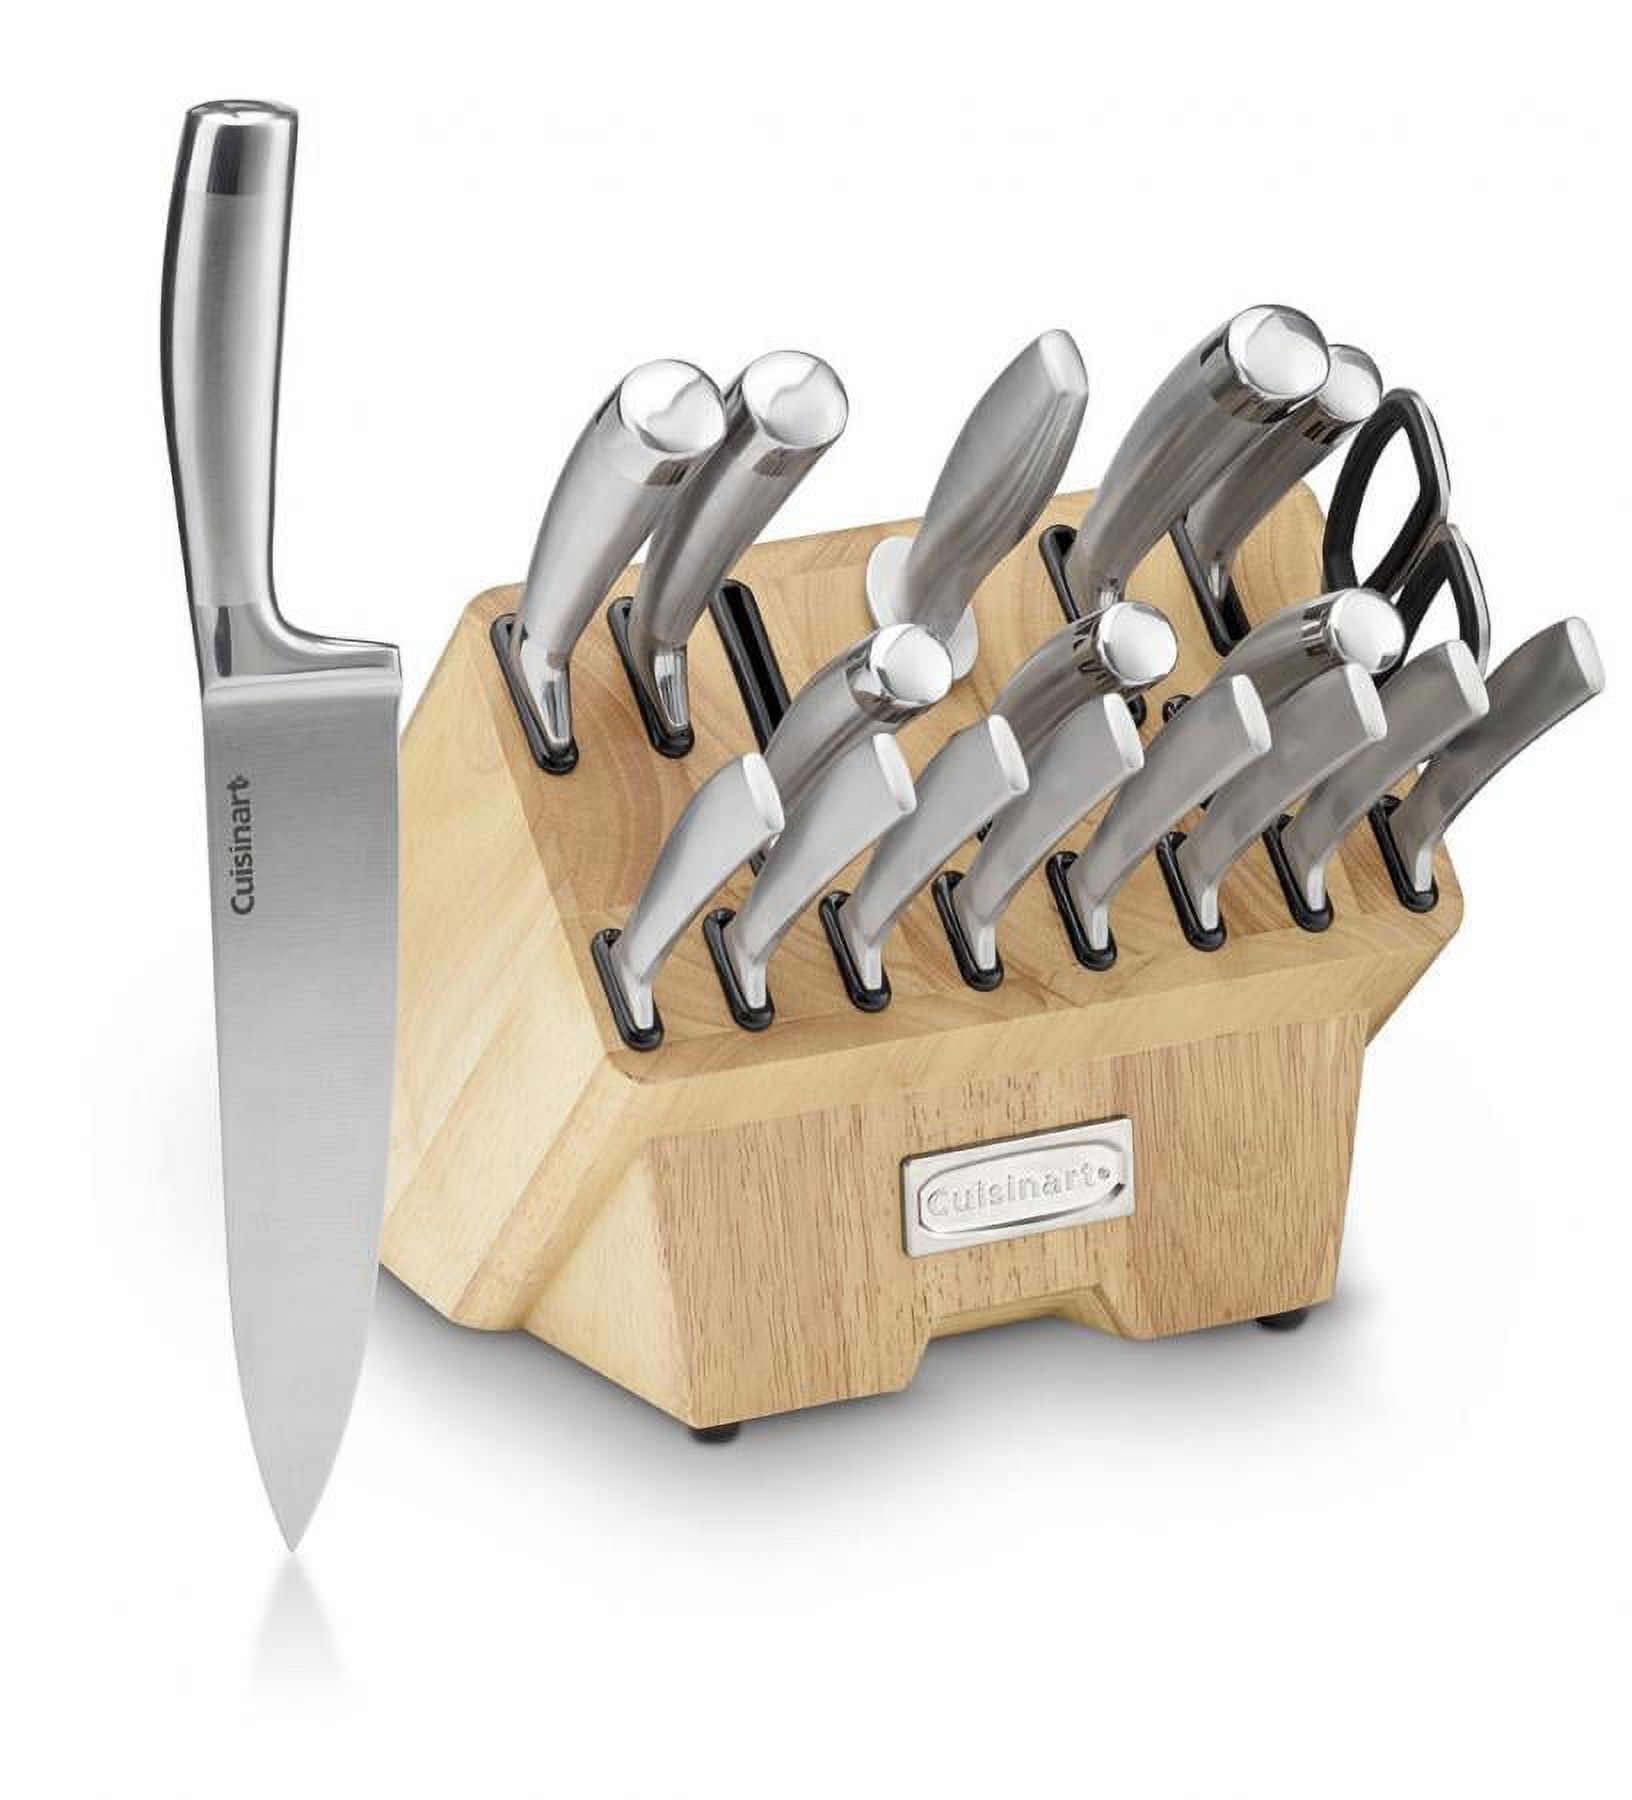 Cuisinart C77SS-19P 19pc Stainless Steel Cutlery Block Set- Normandy - image 1 of 2